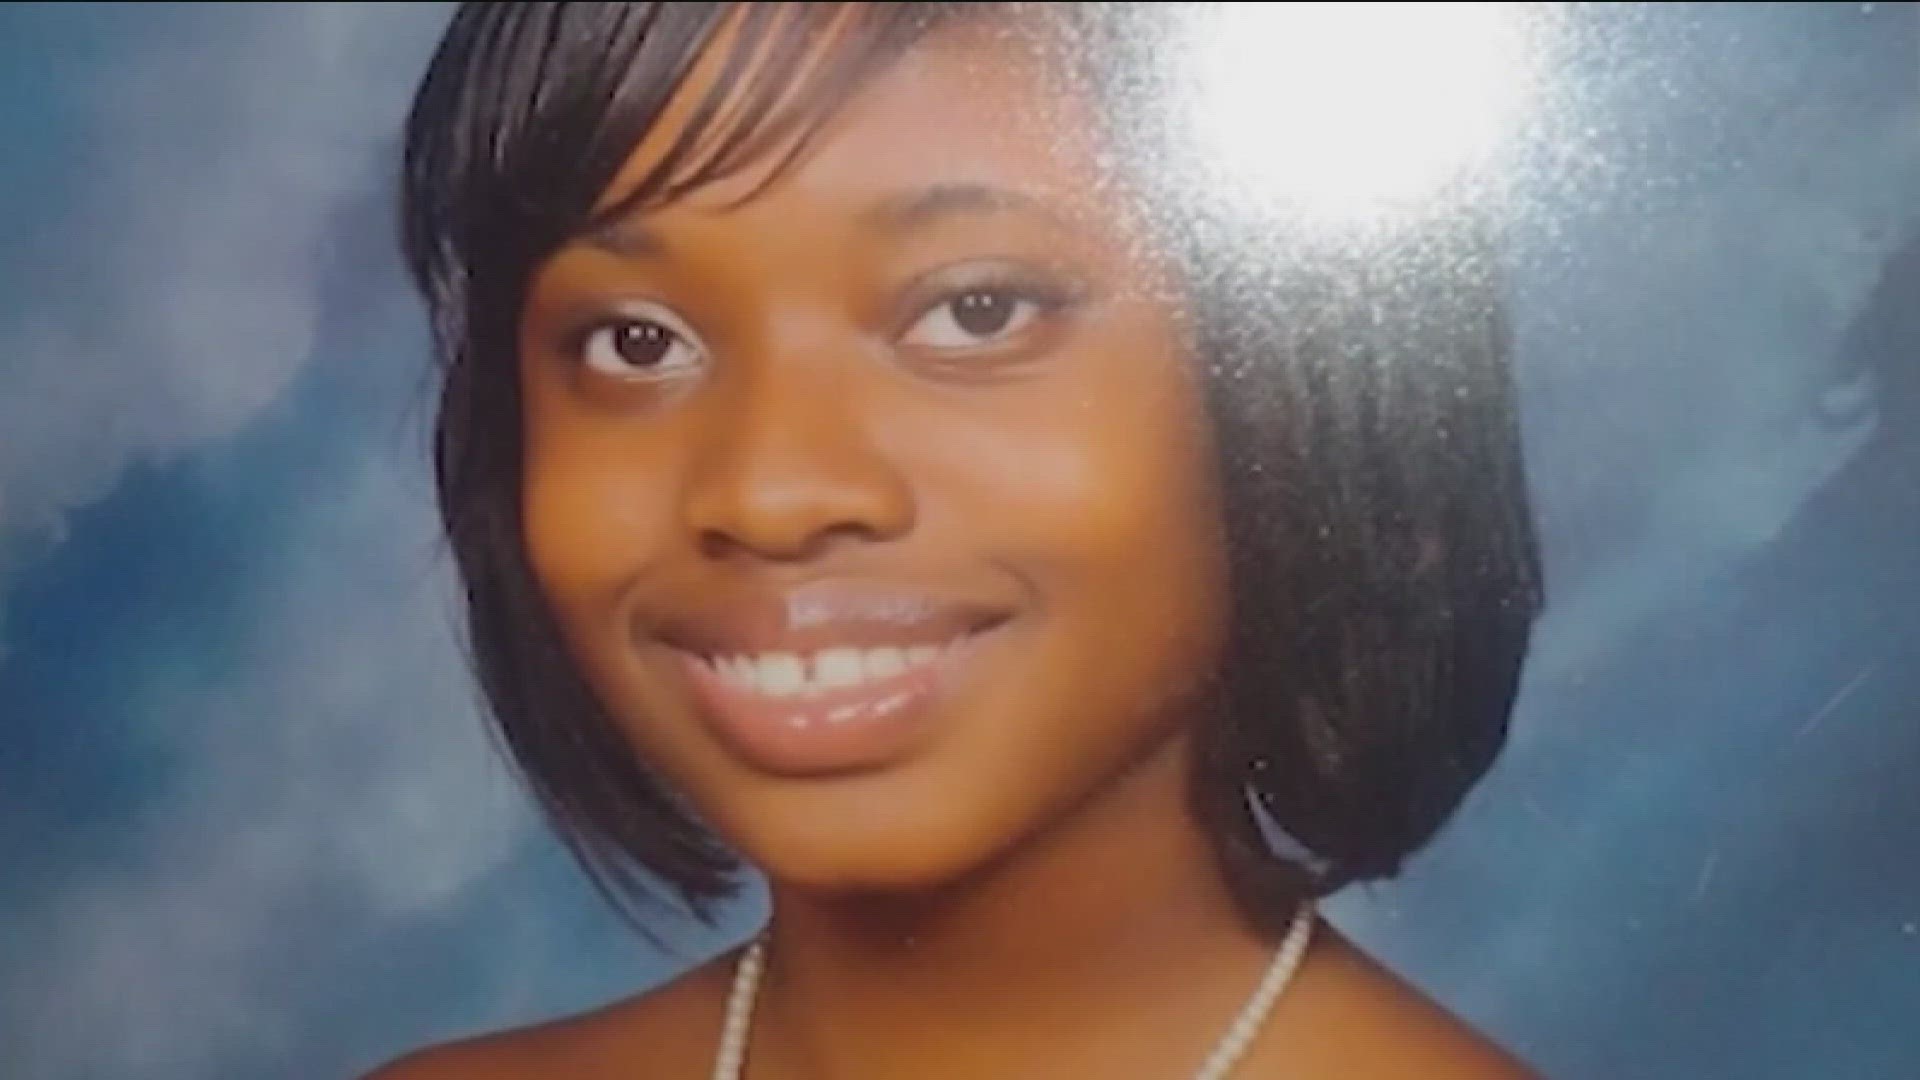 Attorney Ben Crump and the family of Brianna Grier are holding a news conference Wednesday.